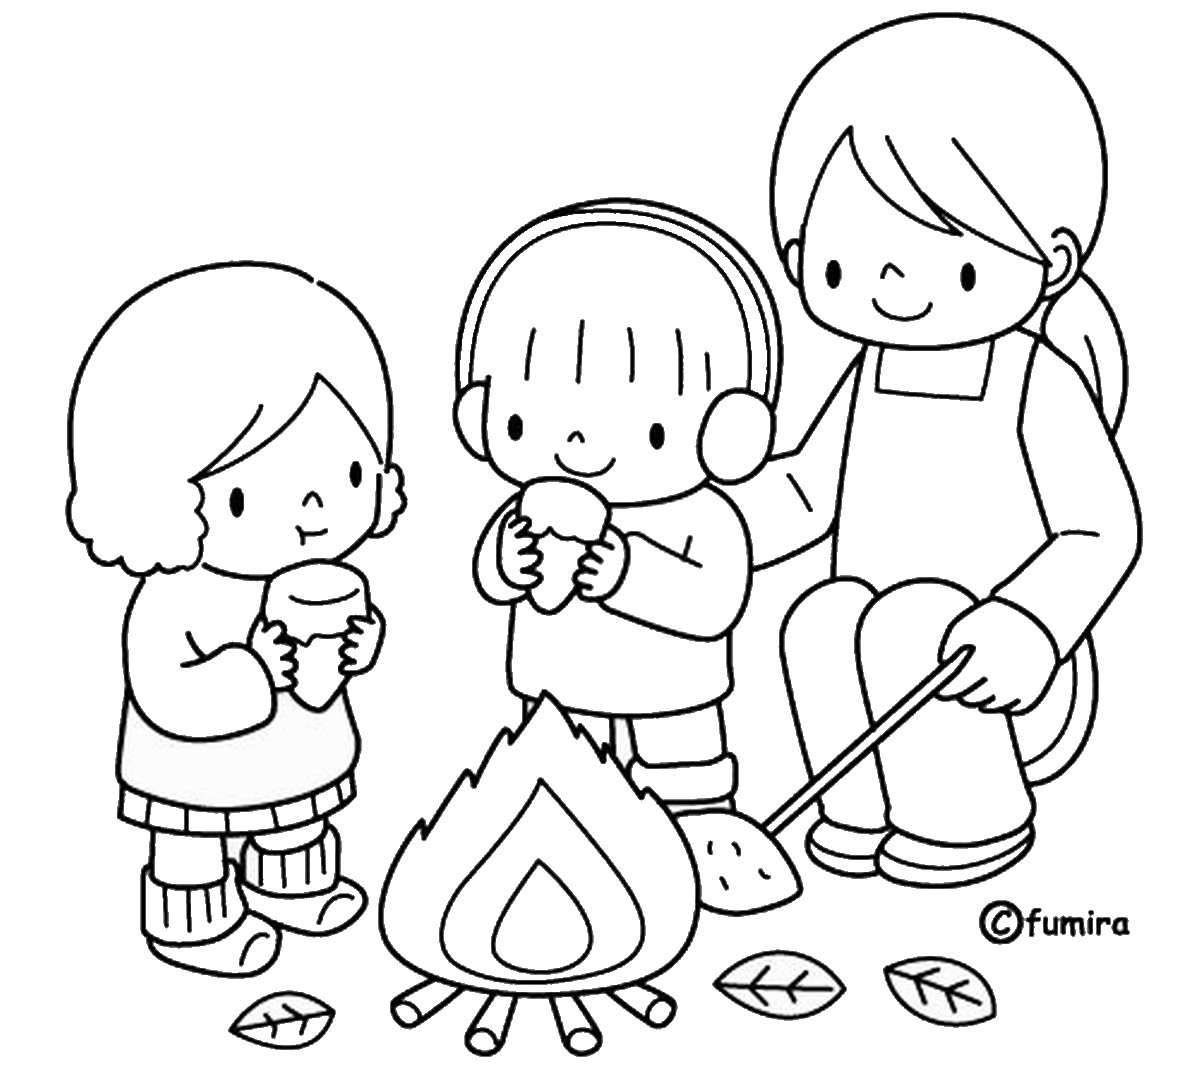 que es lag ba omer coloring pages - photo #1